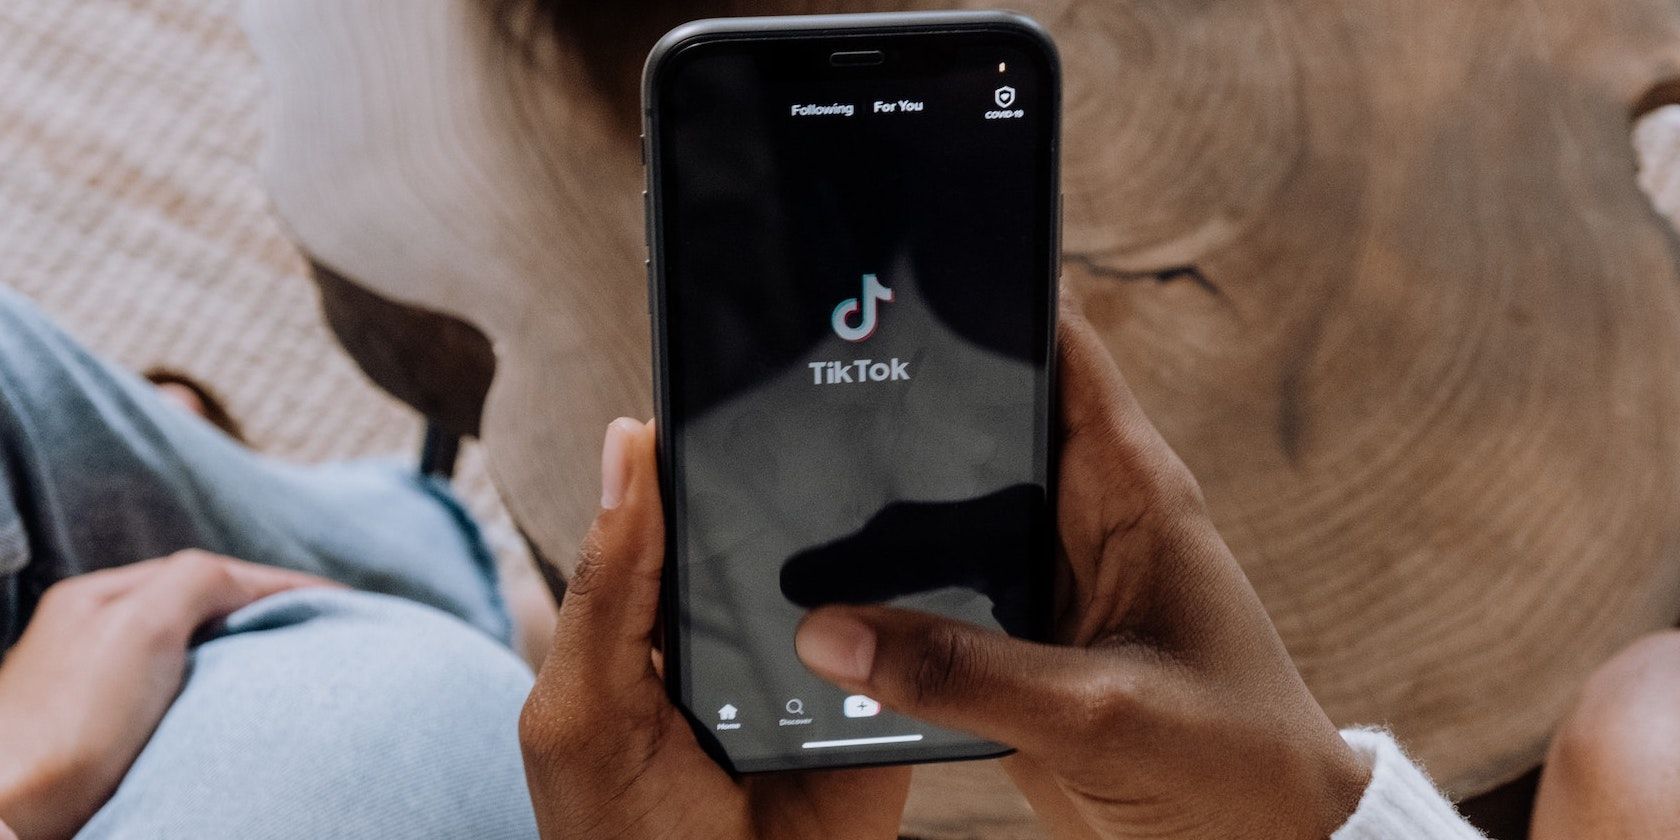 Hands holding a smartphone with the Tiktok logo on the screen